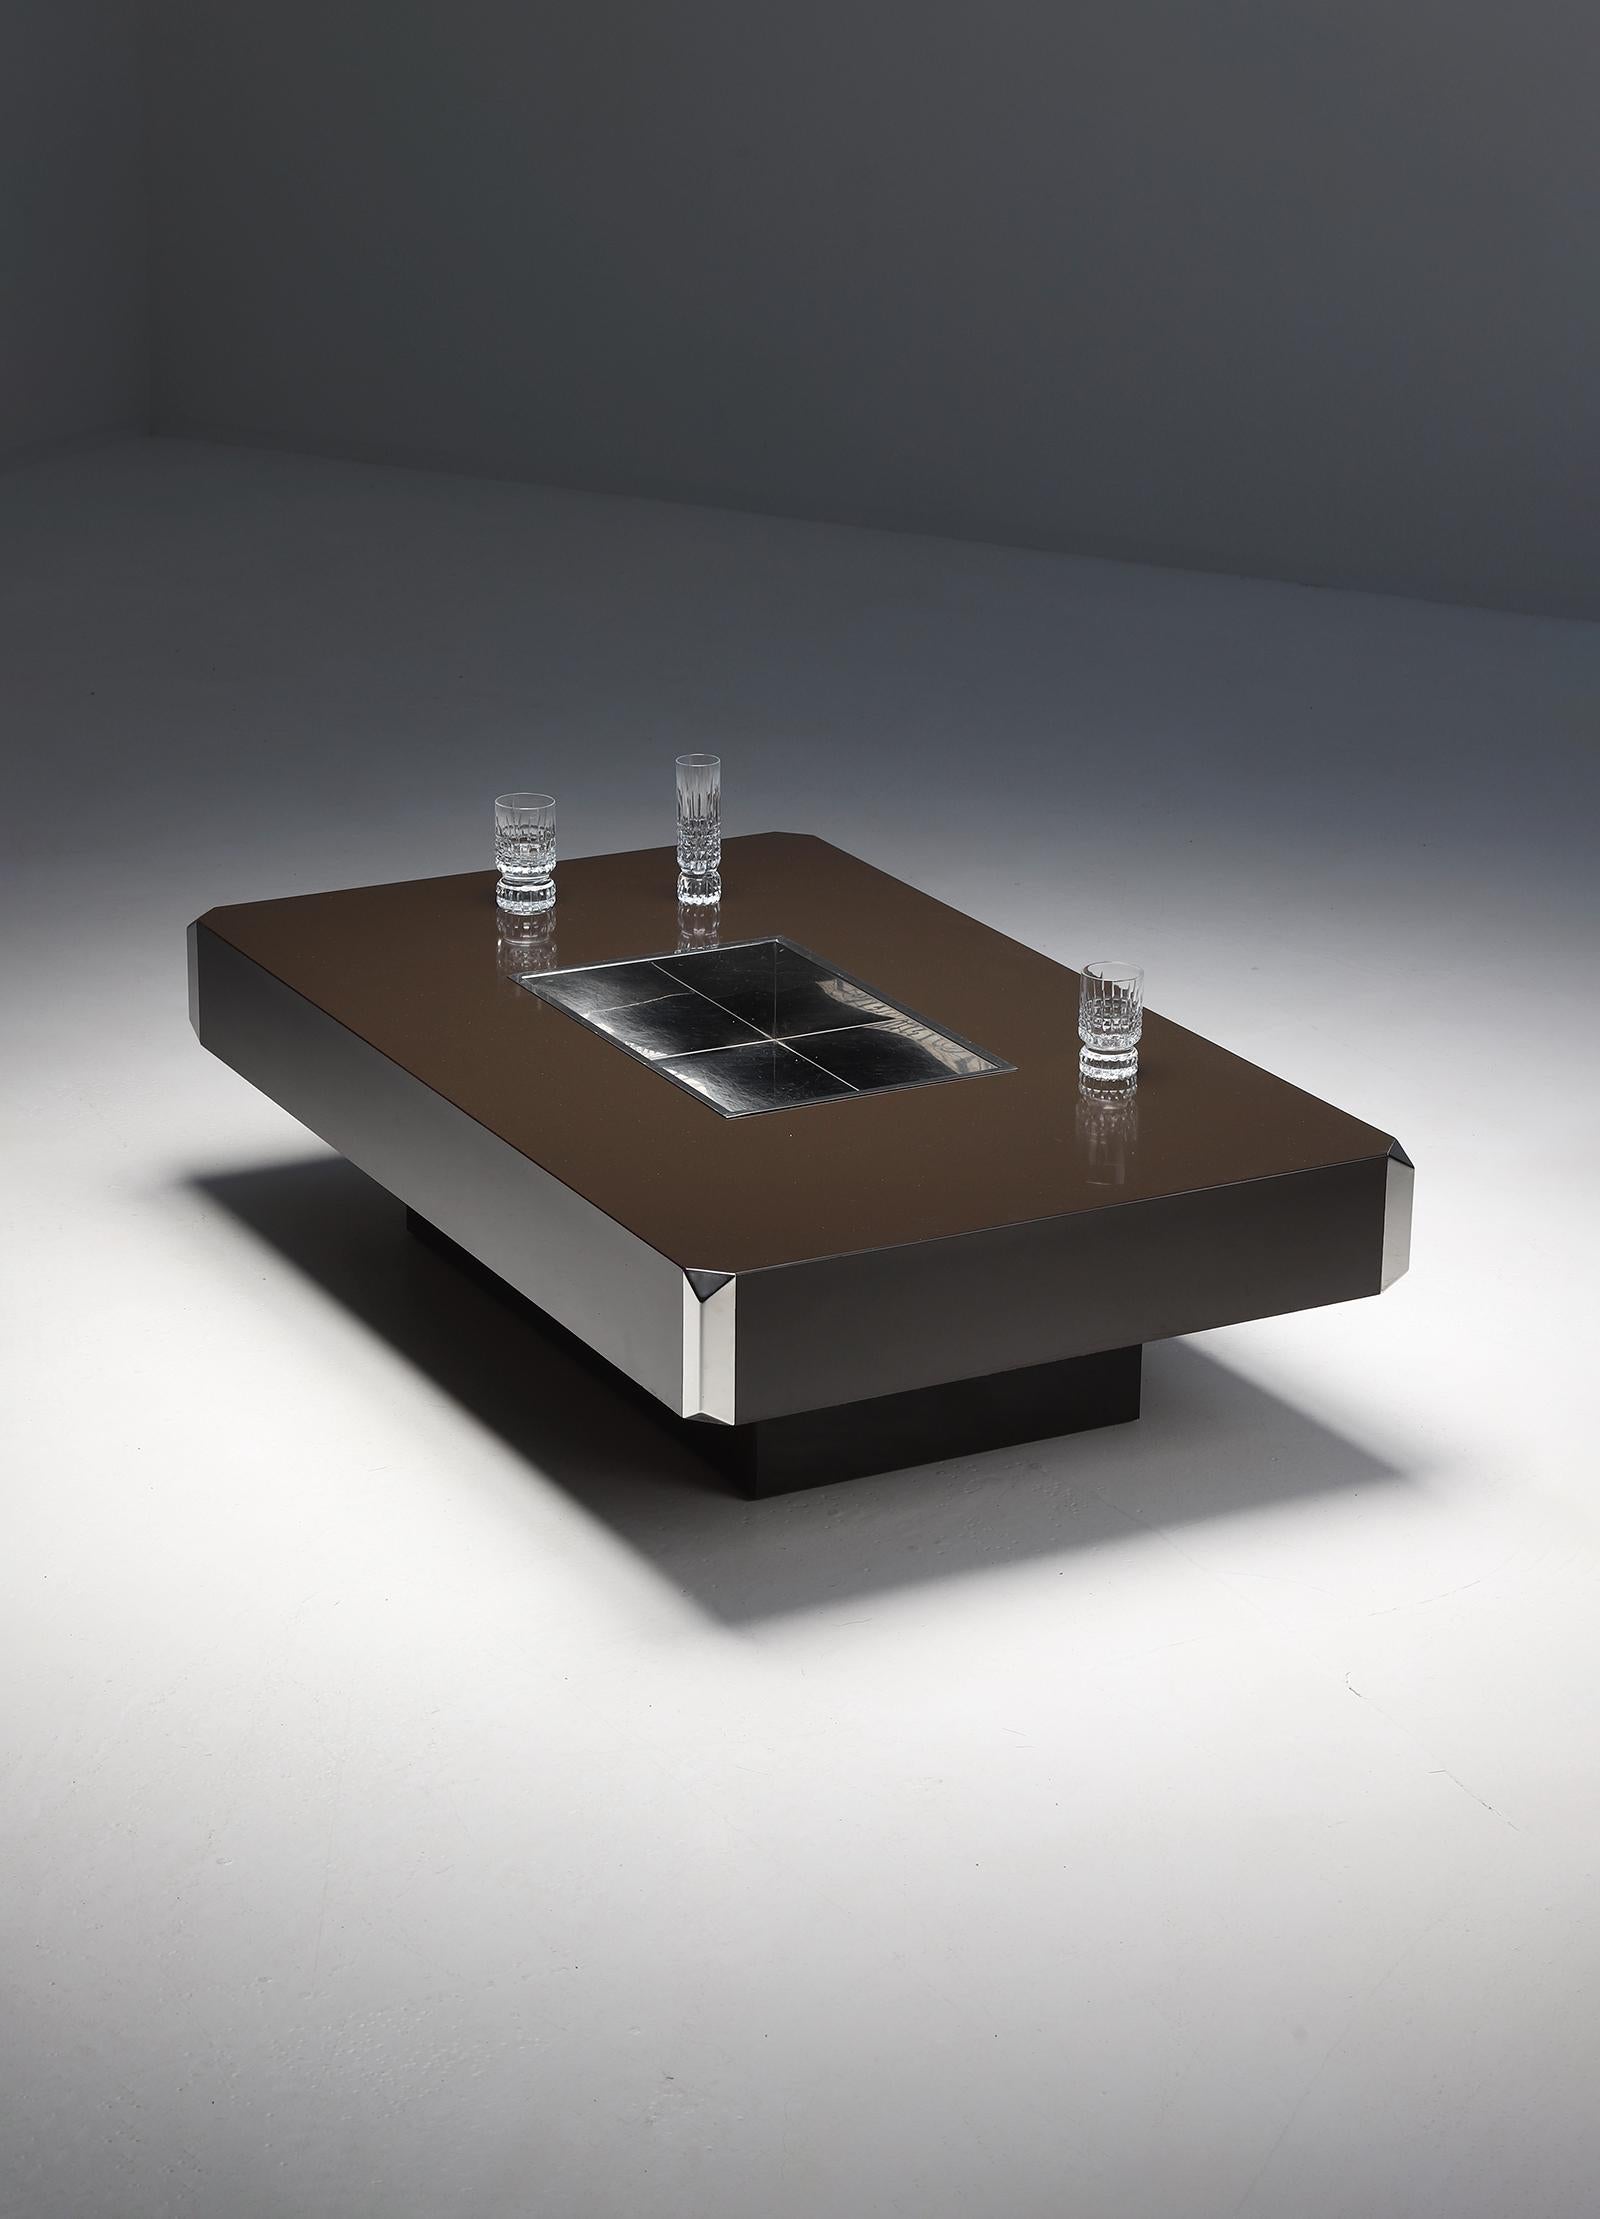 Late 20th Century Modern Alveo Coffee Table by Willy Rizzo for Mario Sabot in Brown Formica 1972